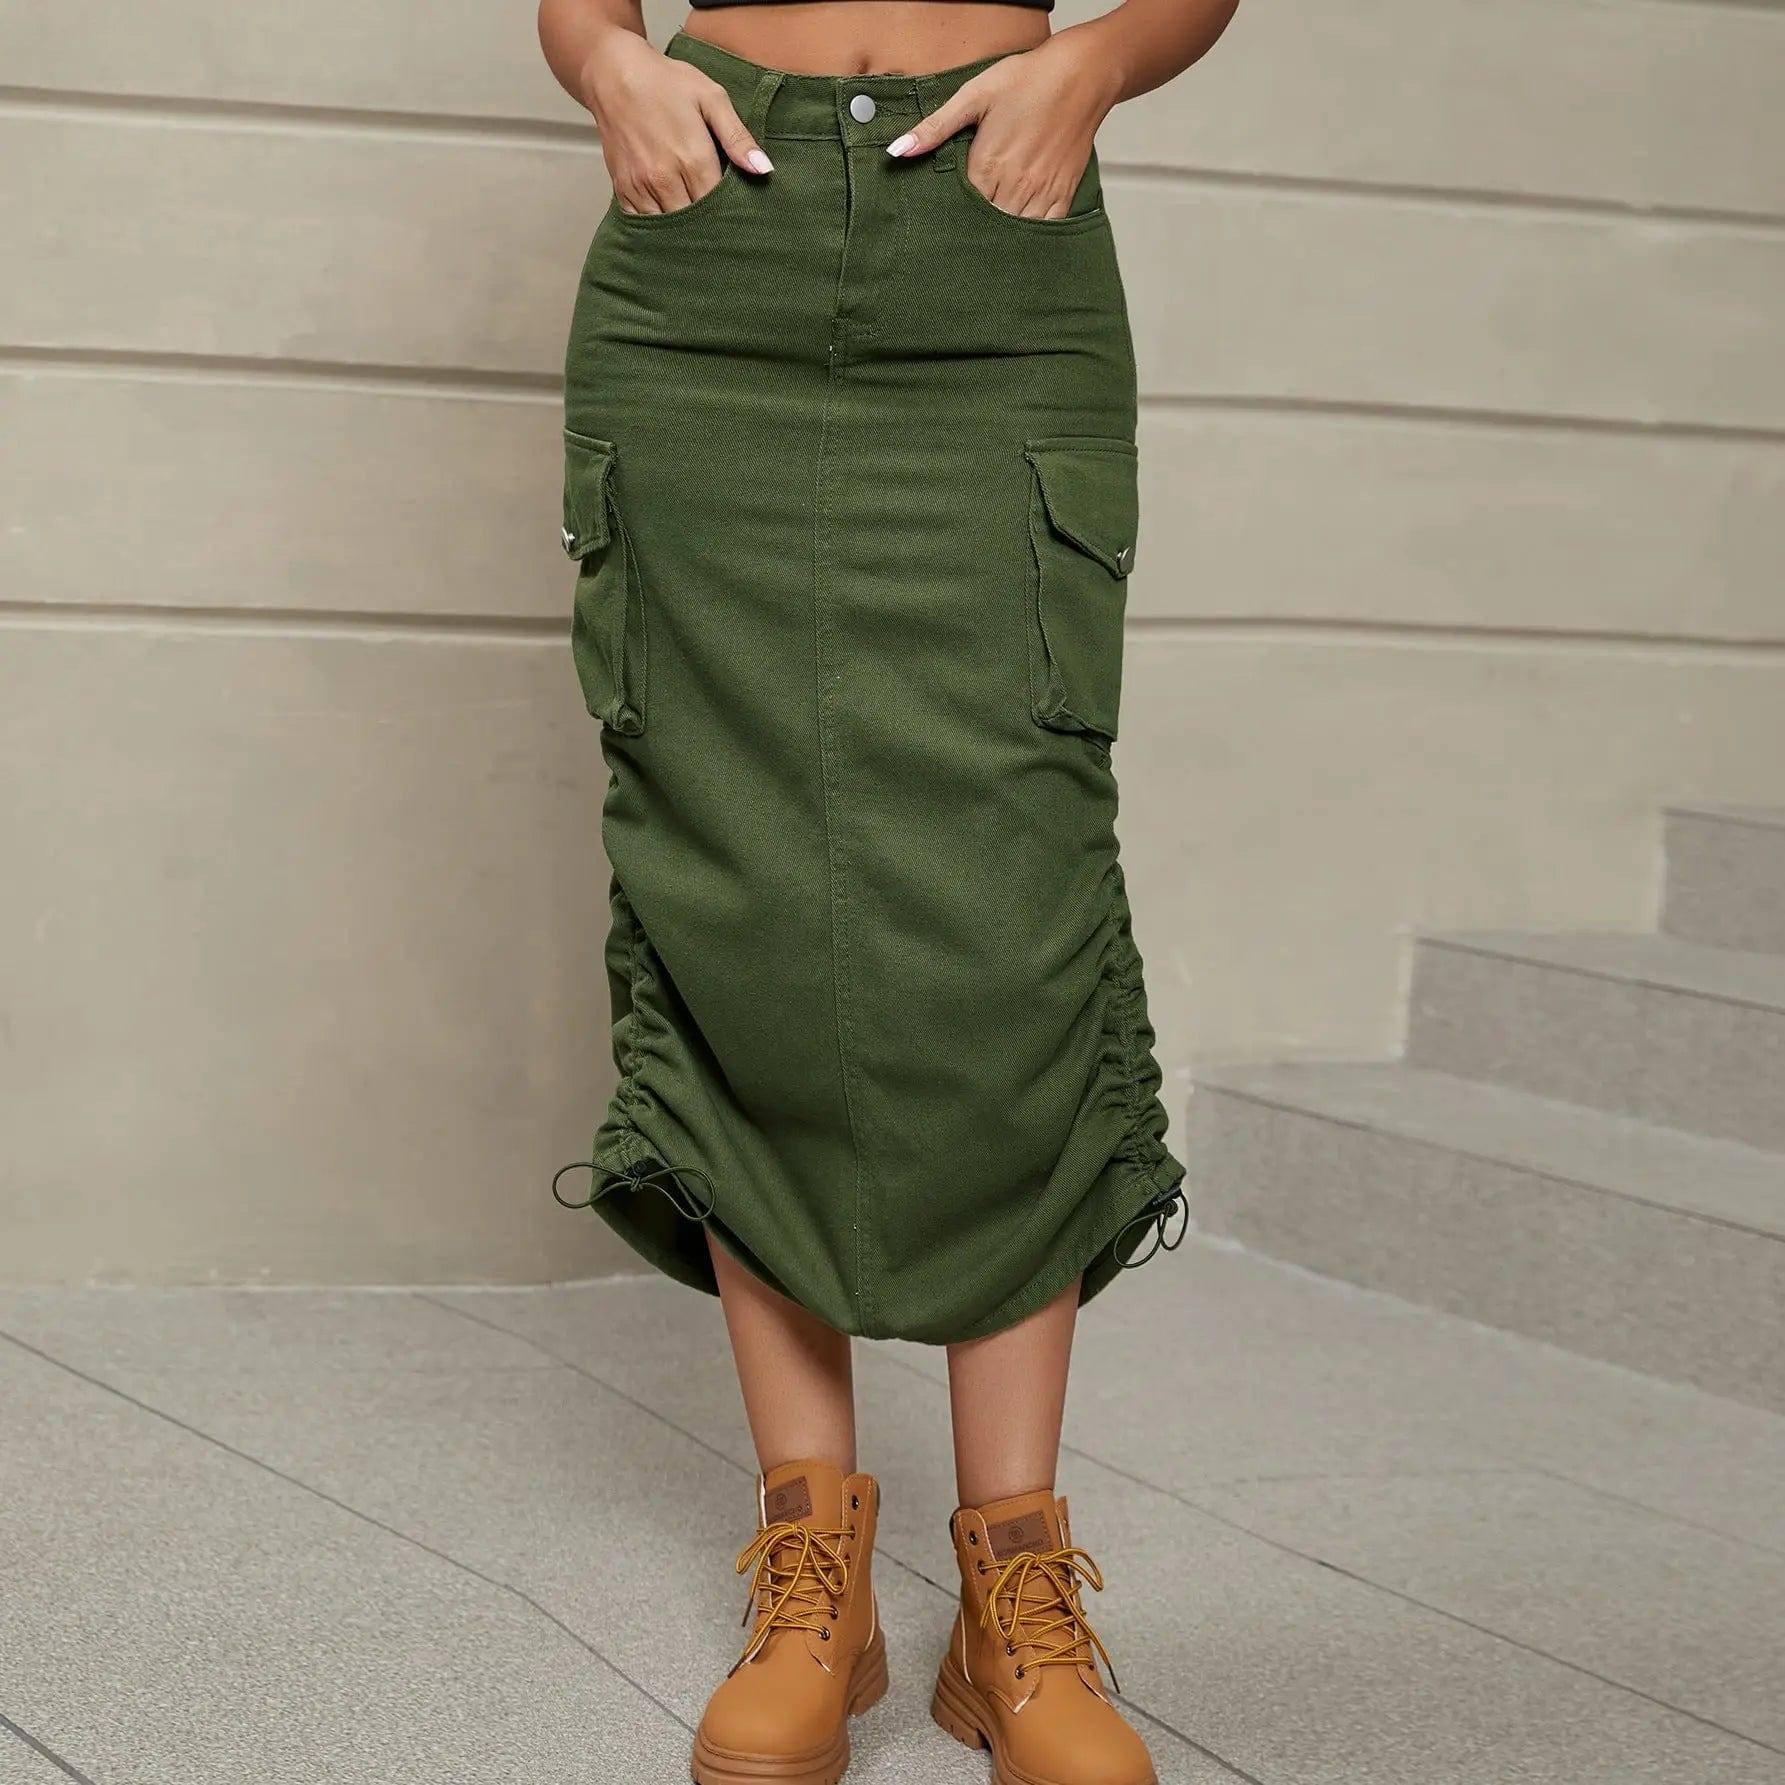 Women's Fashionable Casual Mid-length Skirt-Army Green-3